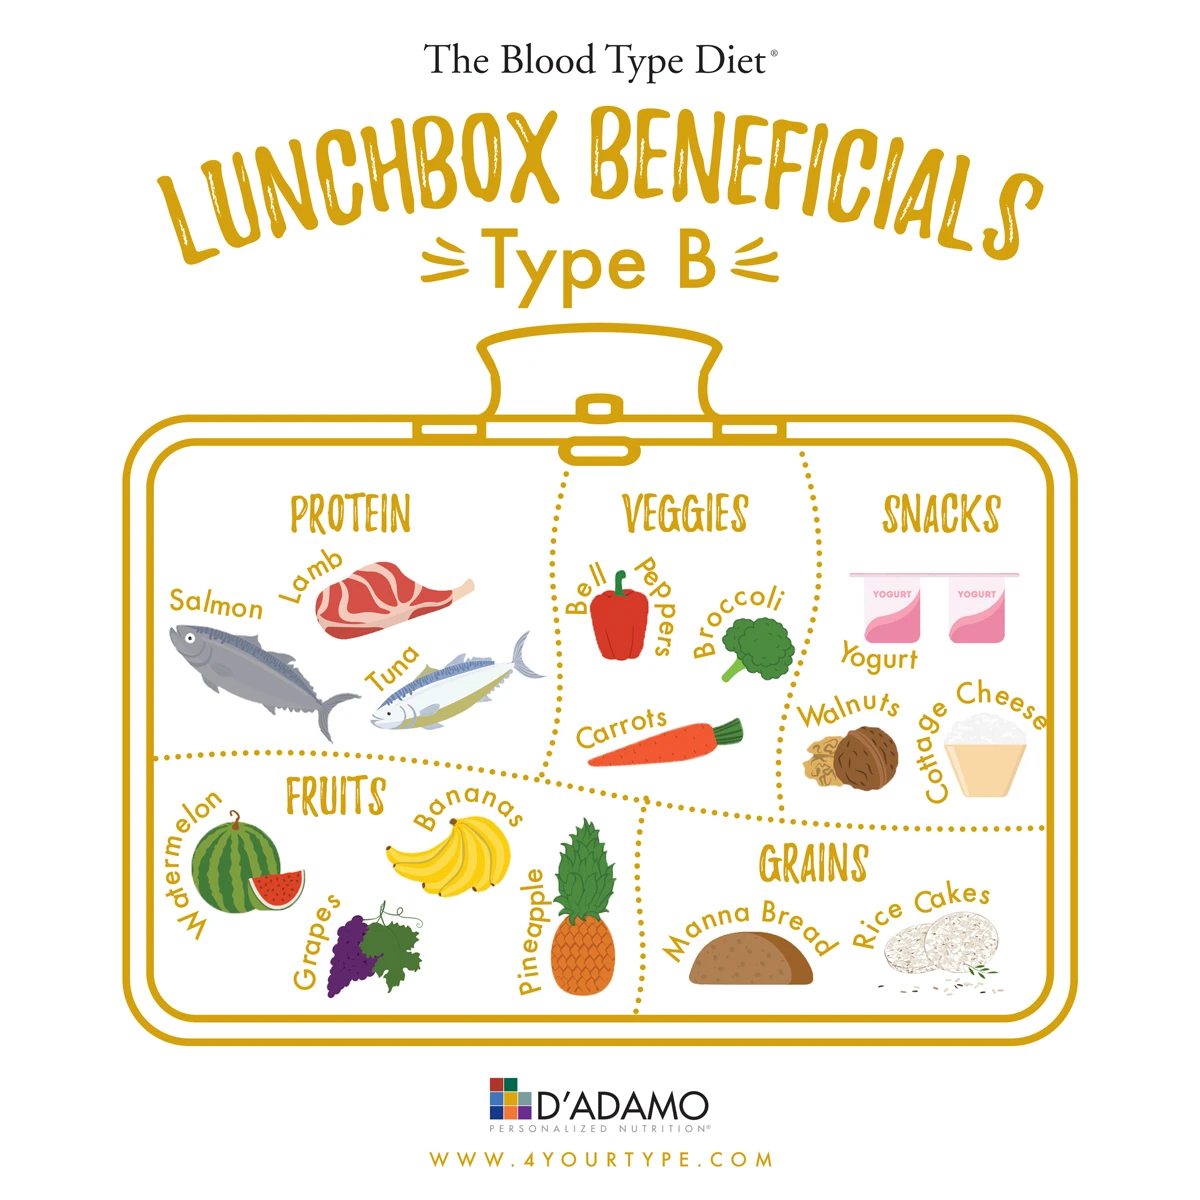 Lunchbox Beneficials Blood Type B